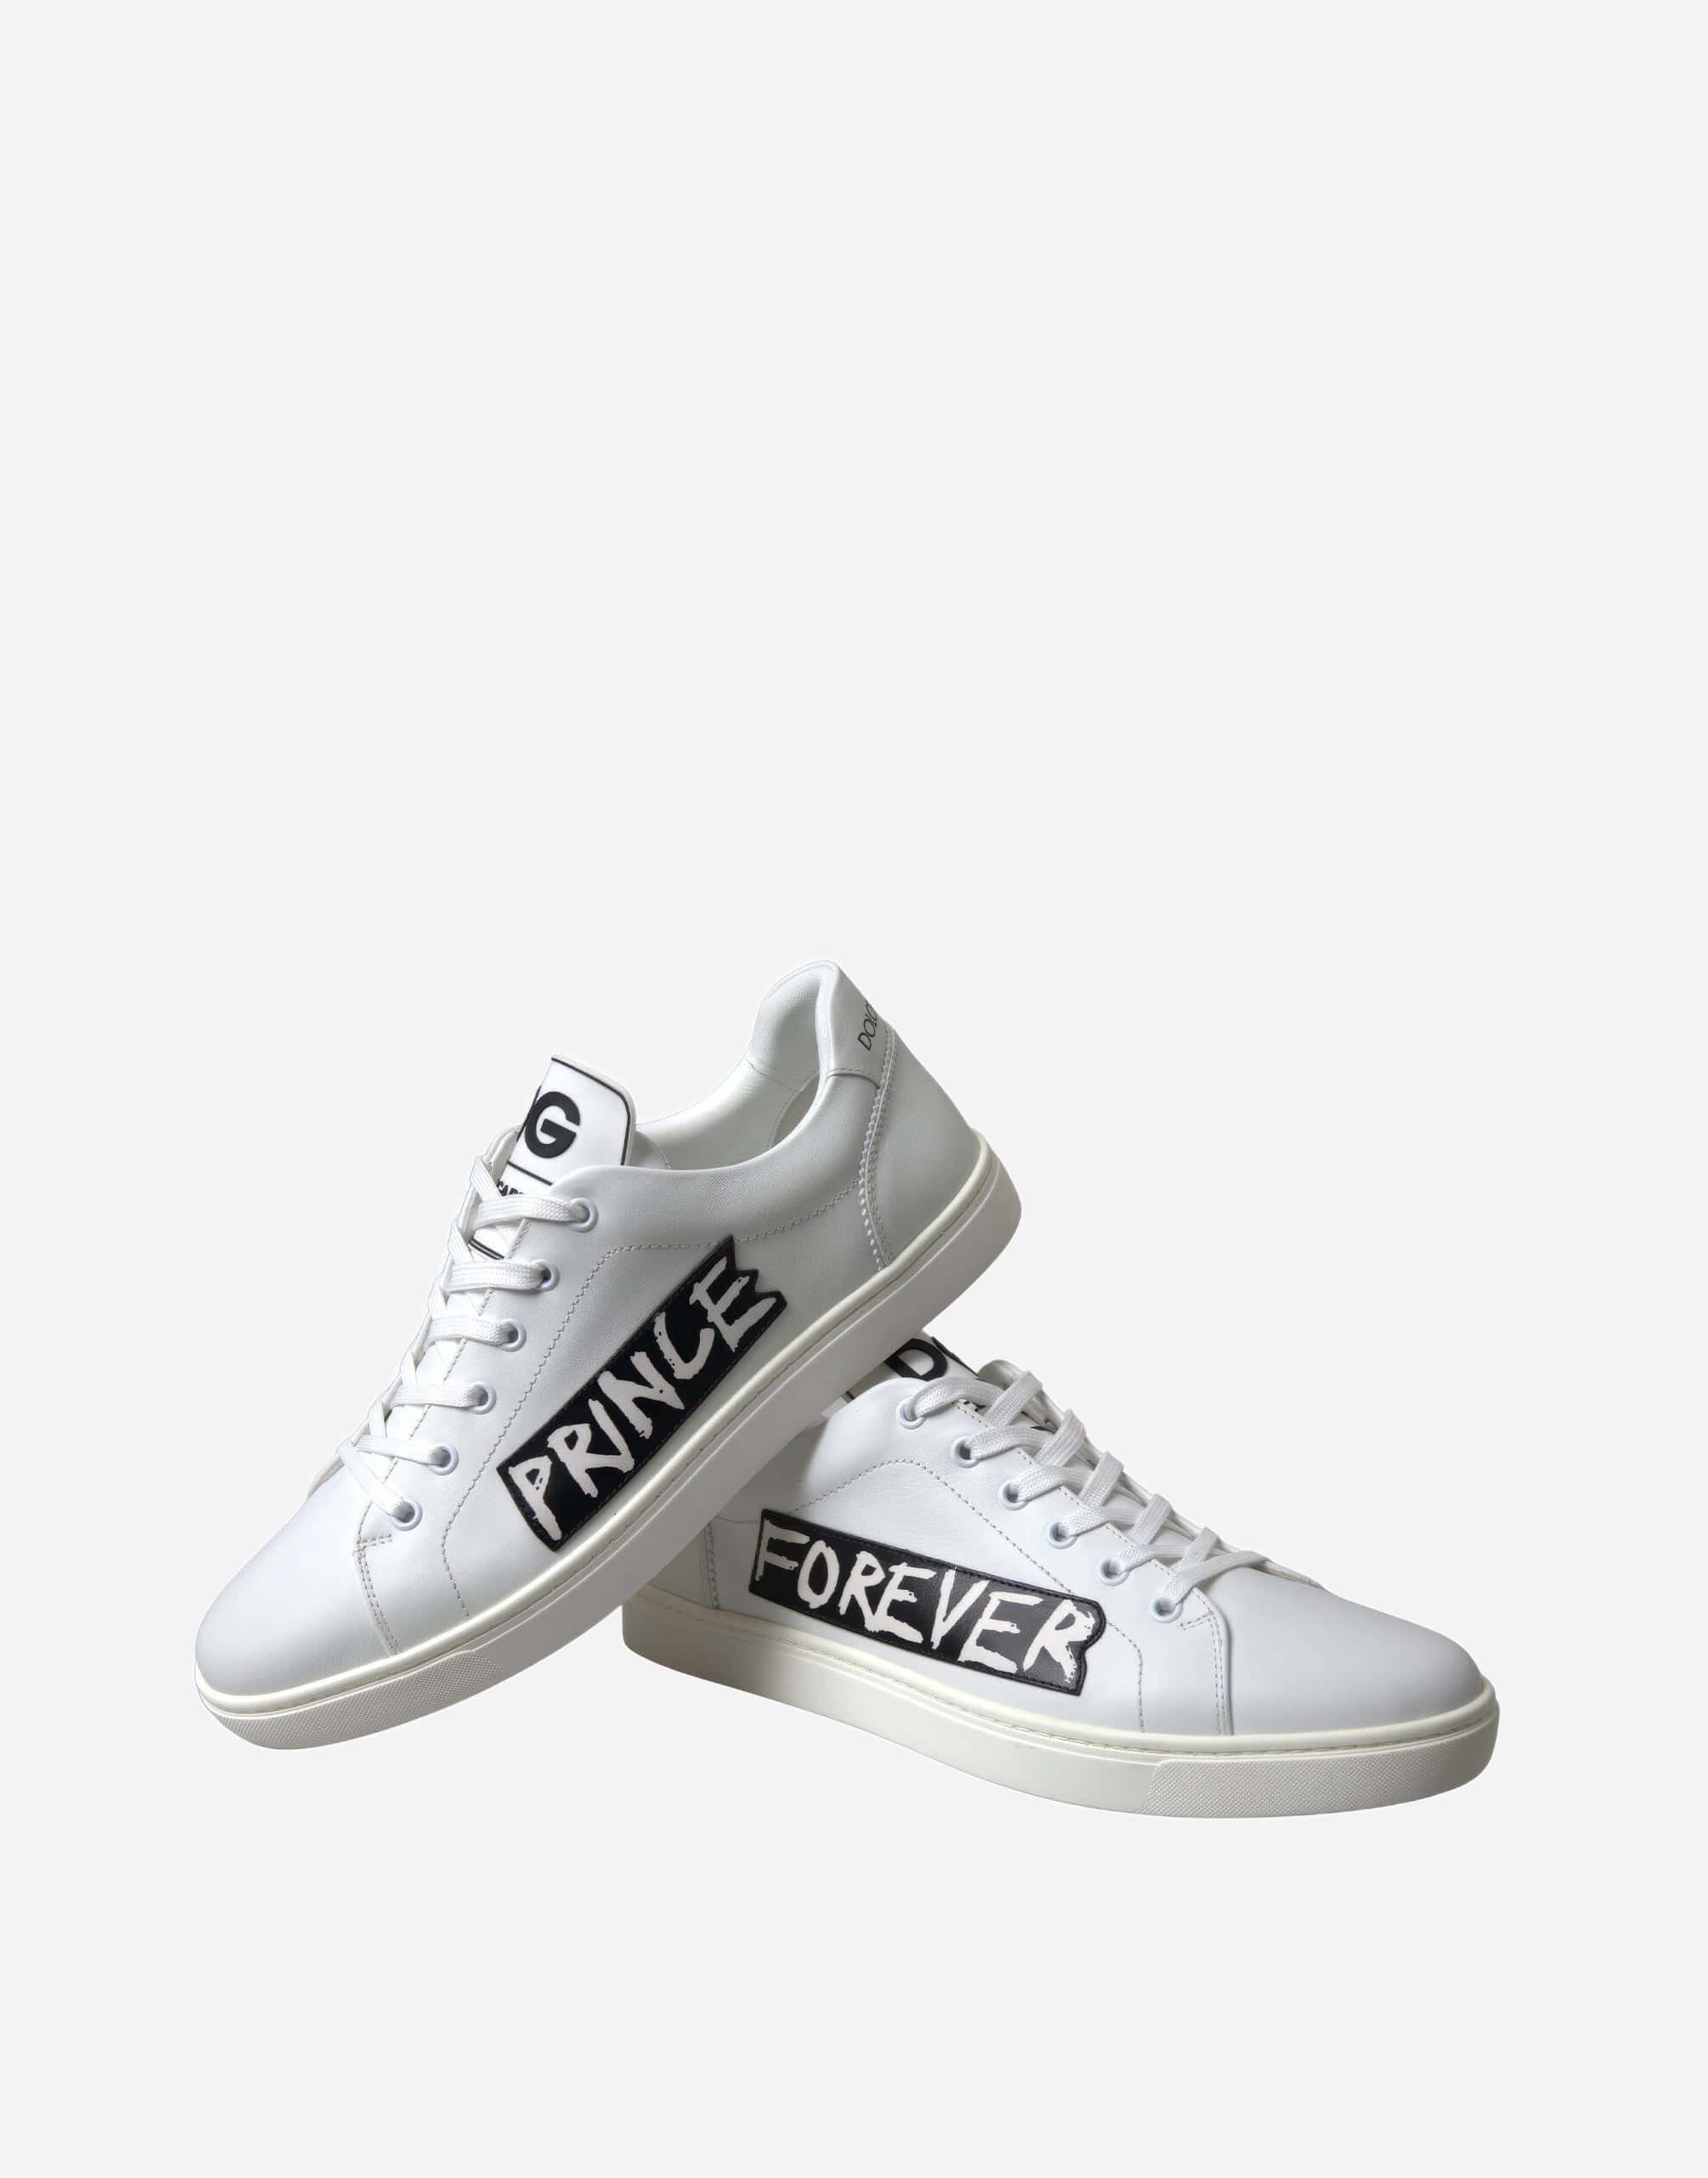 Dolce & Gabbana Forever Prince Sneakers